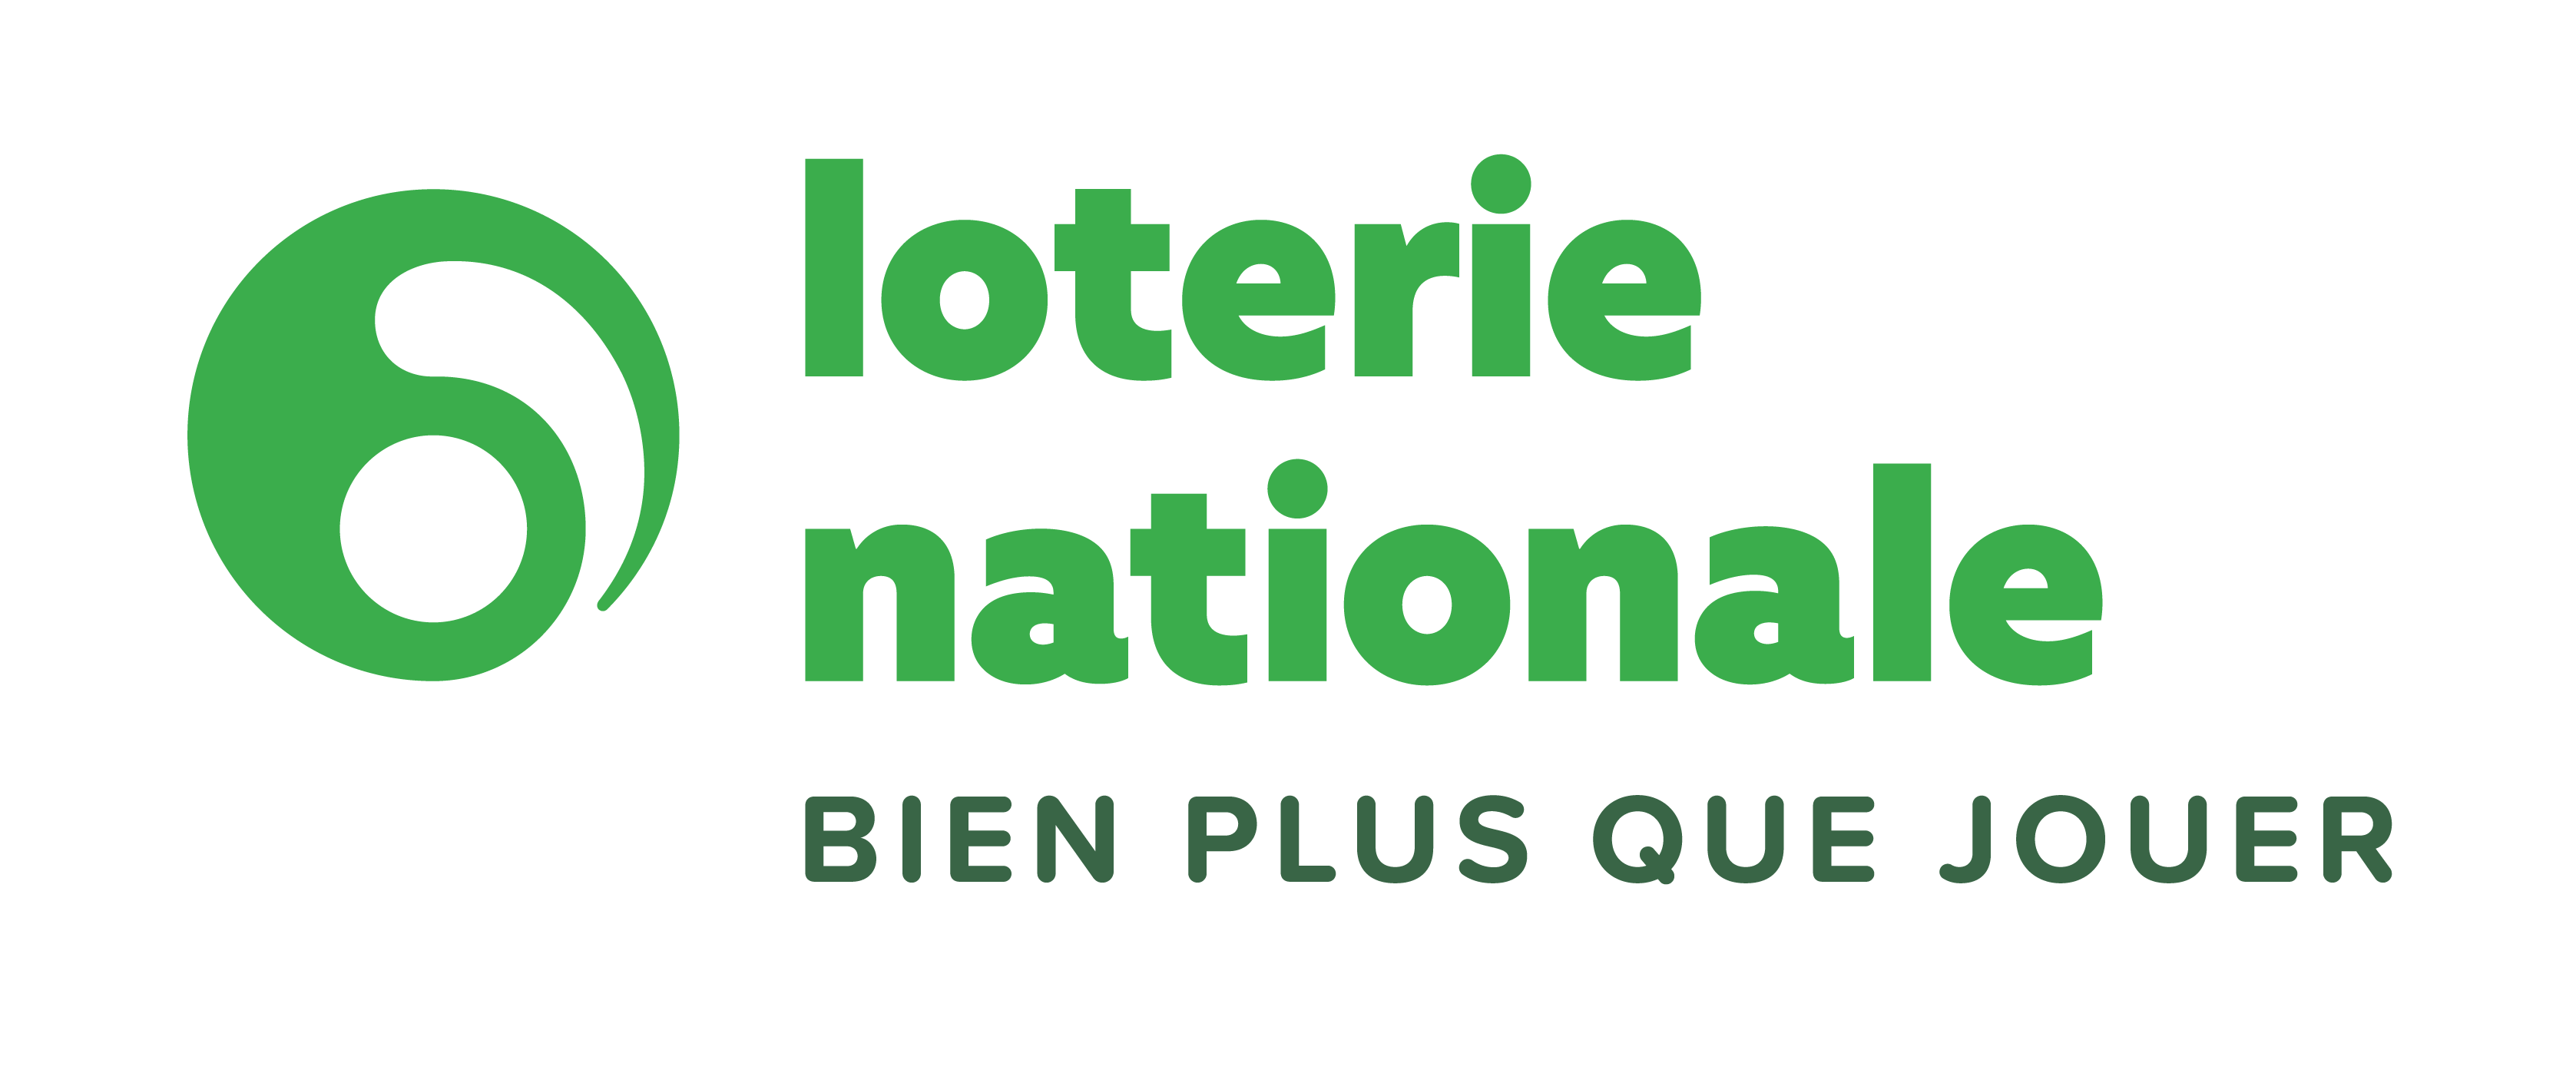 Logo - Loterie Nationale